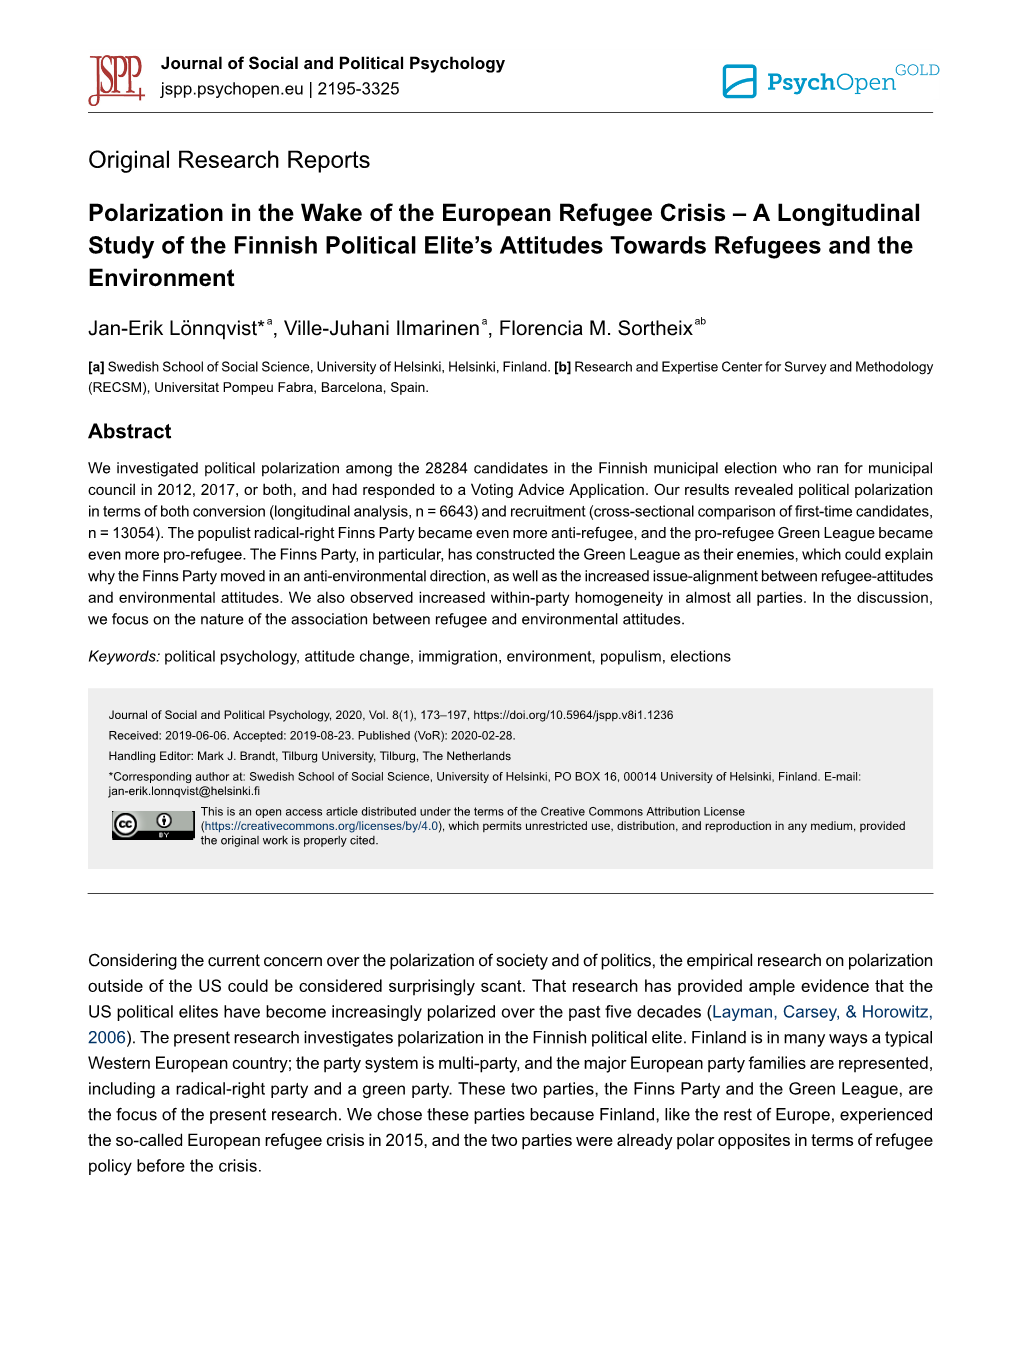 Polarization in the Wake of the European Refugee Crisis – a Longitudinal Study of the Finnish Political Elite’S Attitudes Towards Refugees and the Environment